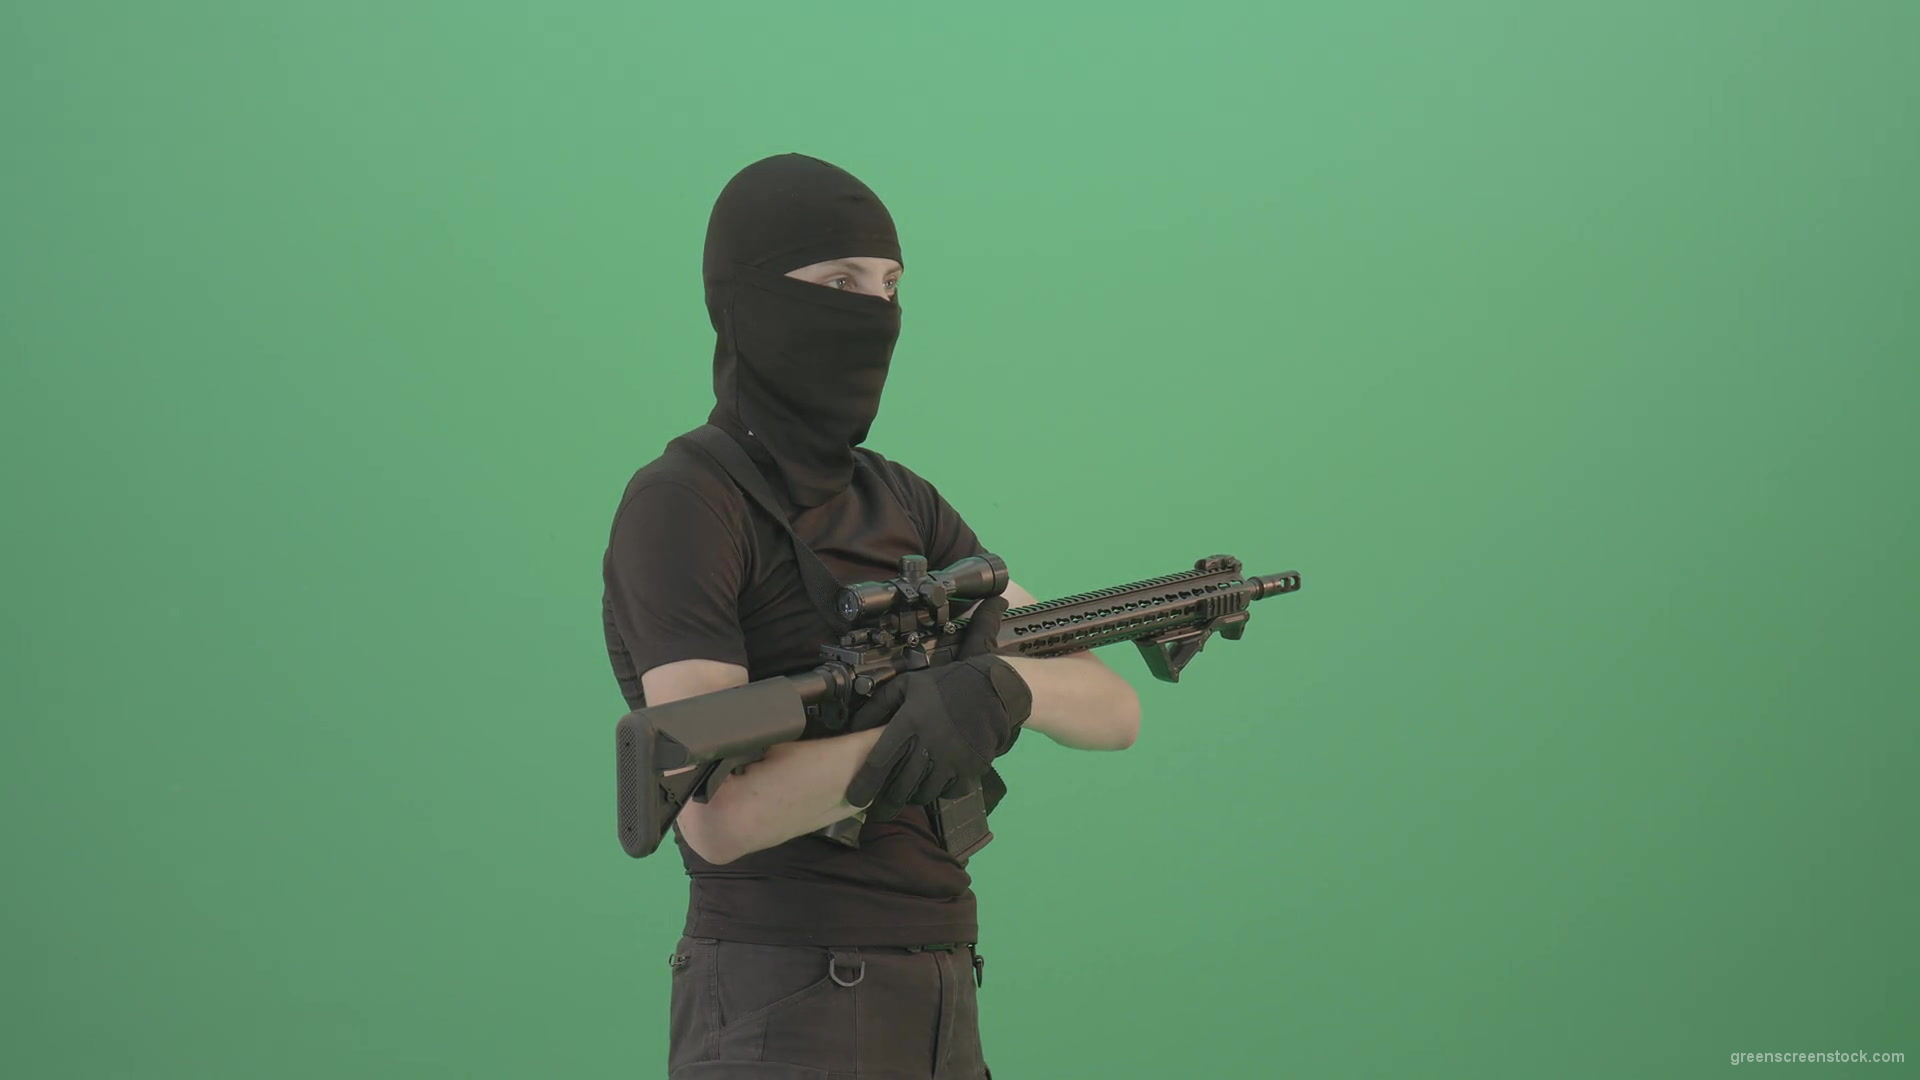 Soldier-man-with-weapon-looking-enemies-isolated-on-green-screen-4K-Video-Footage-1920_002 Green Screen Stock